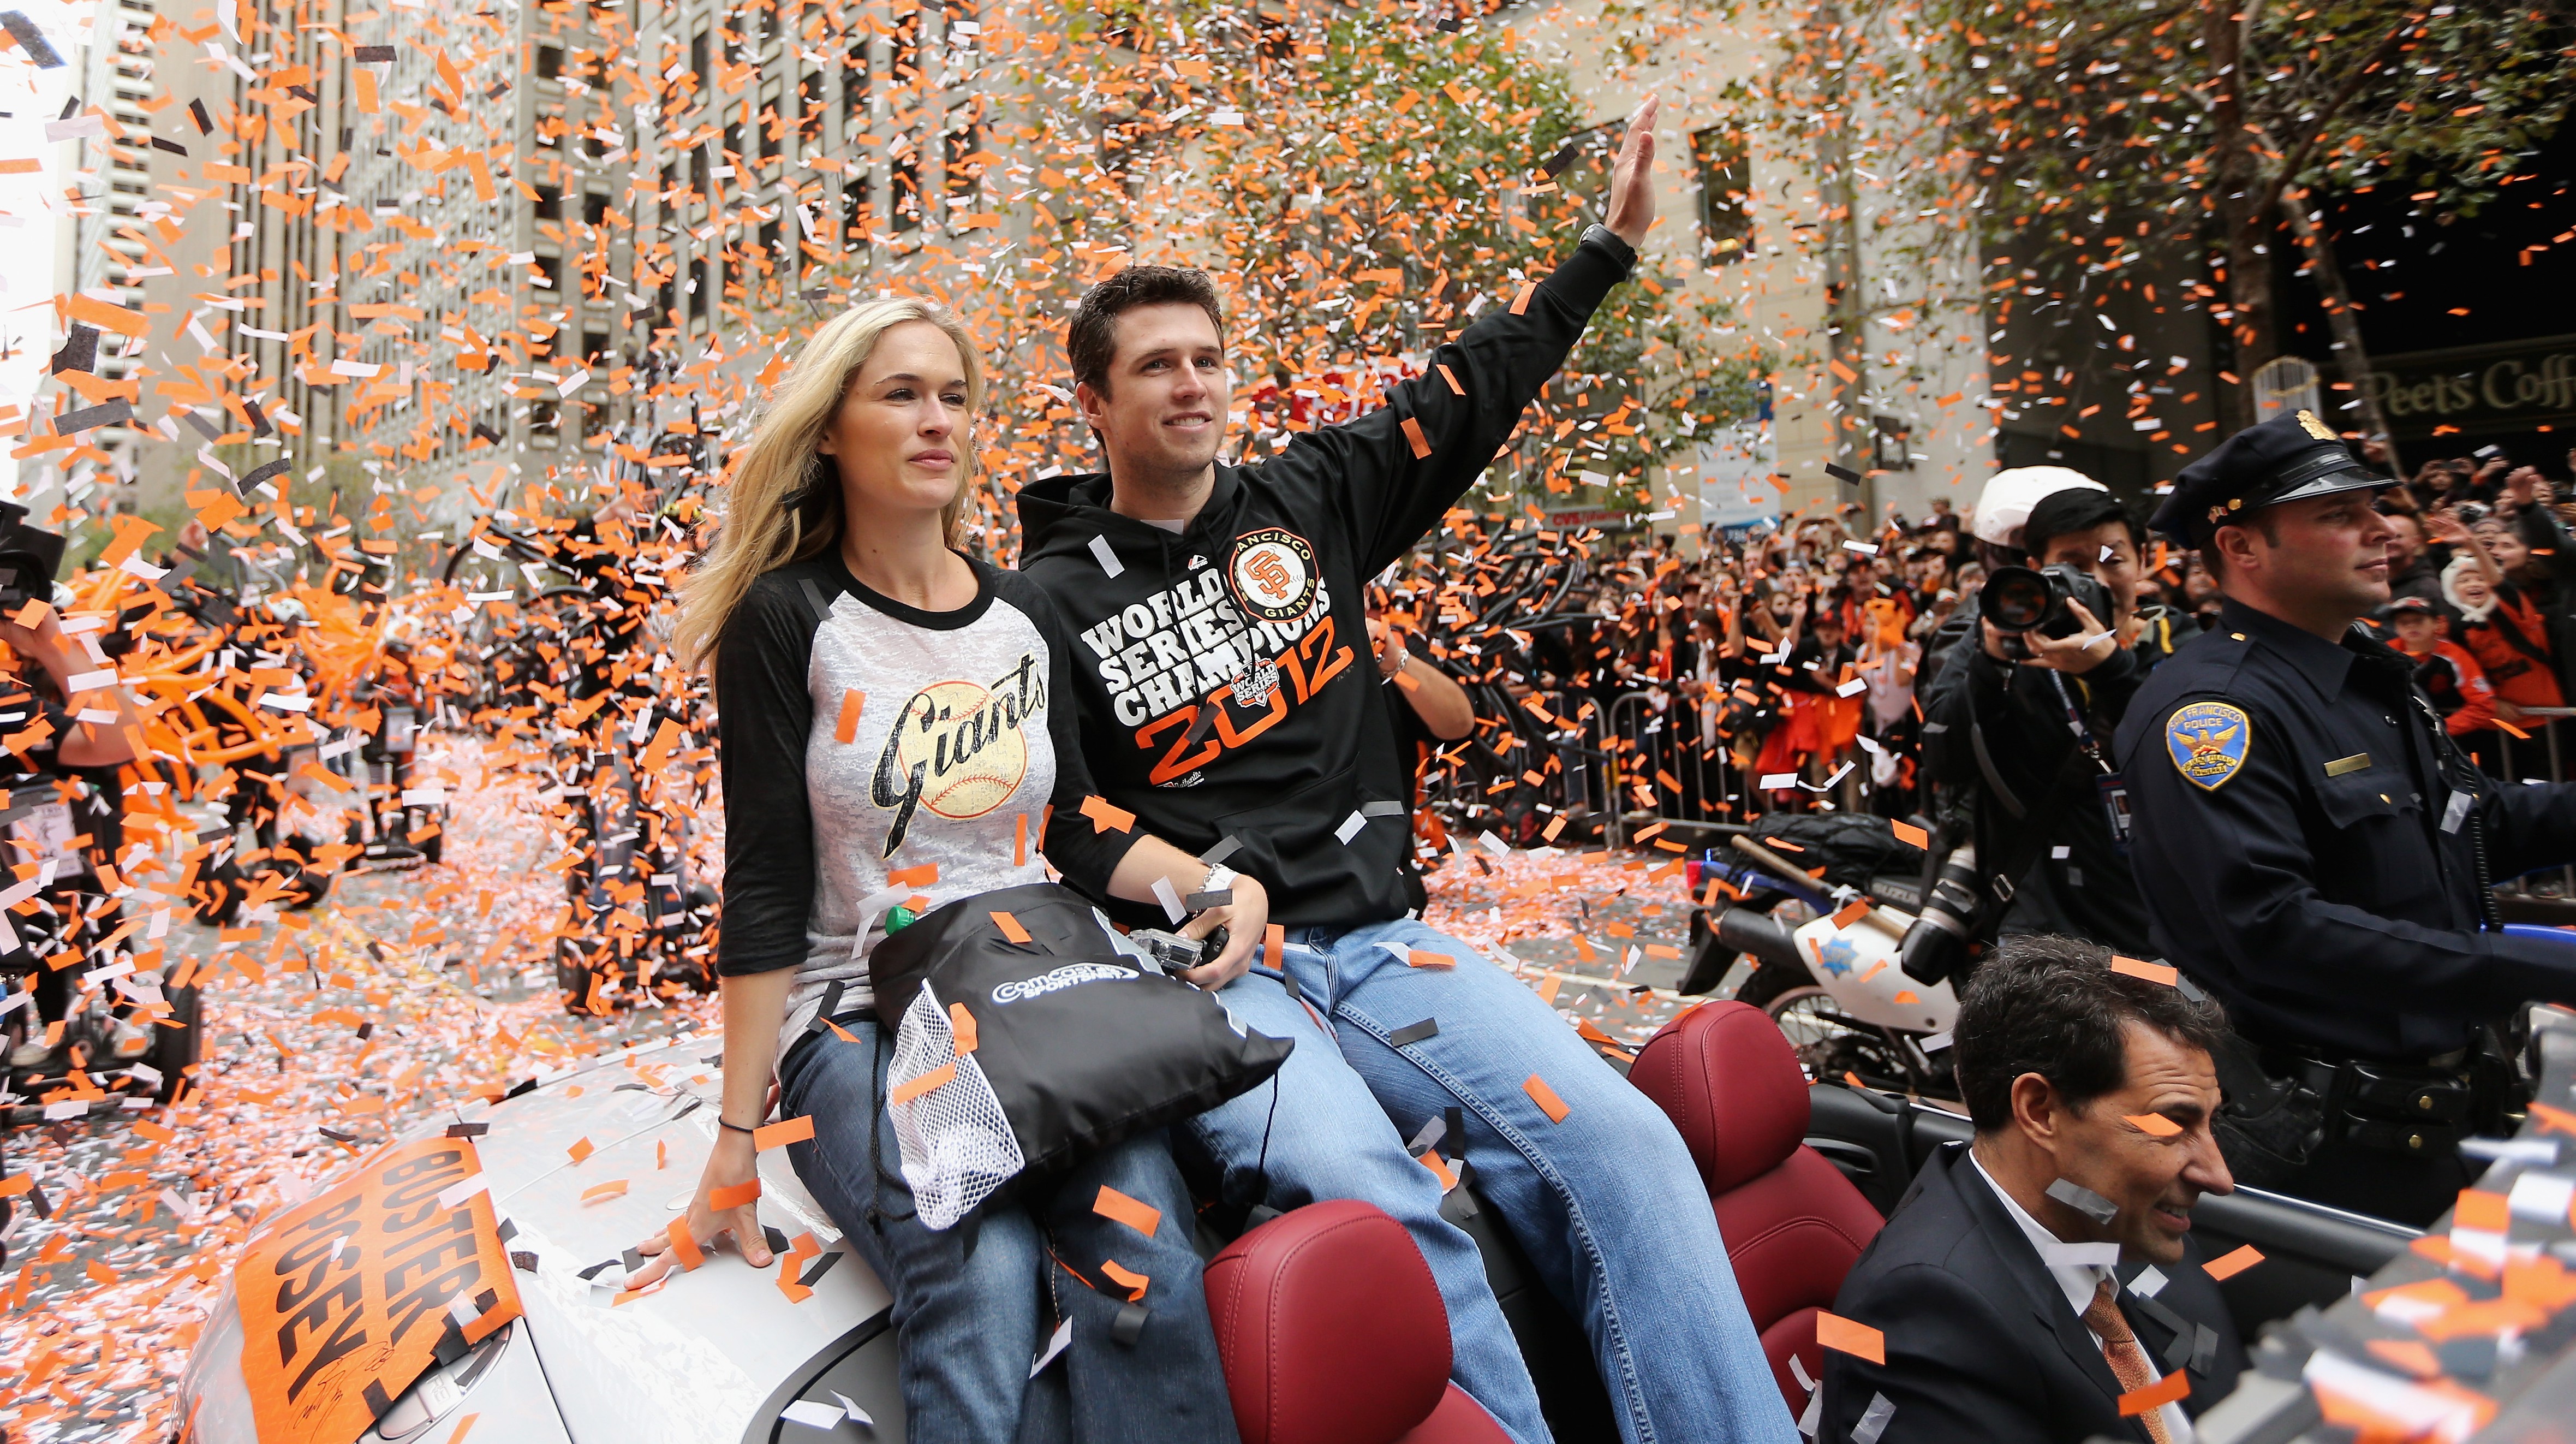 Buster Posey of @sfgiants and his wife Kristin. Buster, 3X World